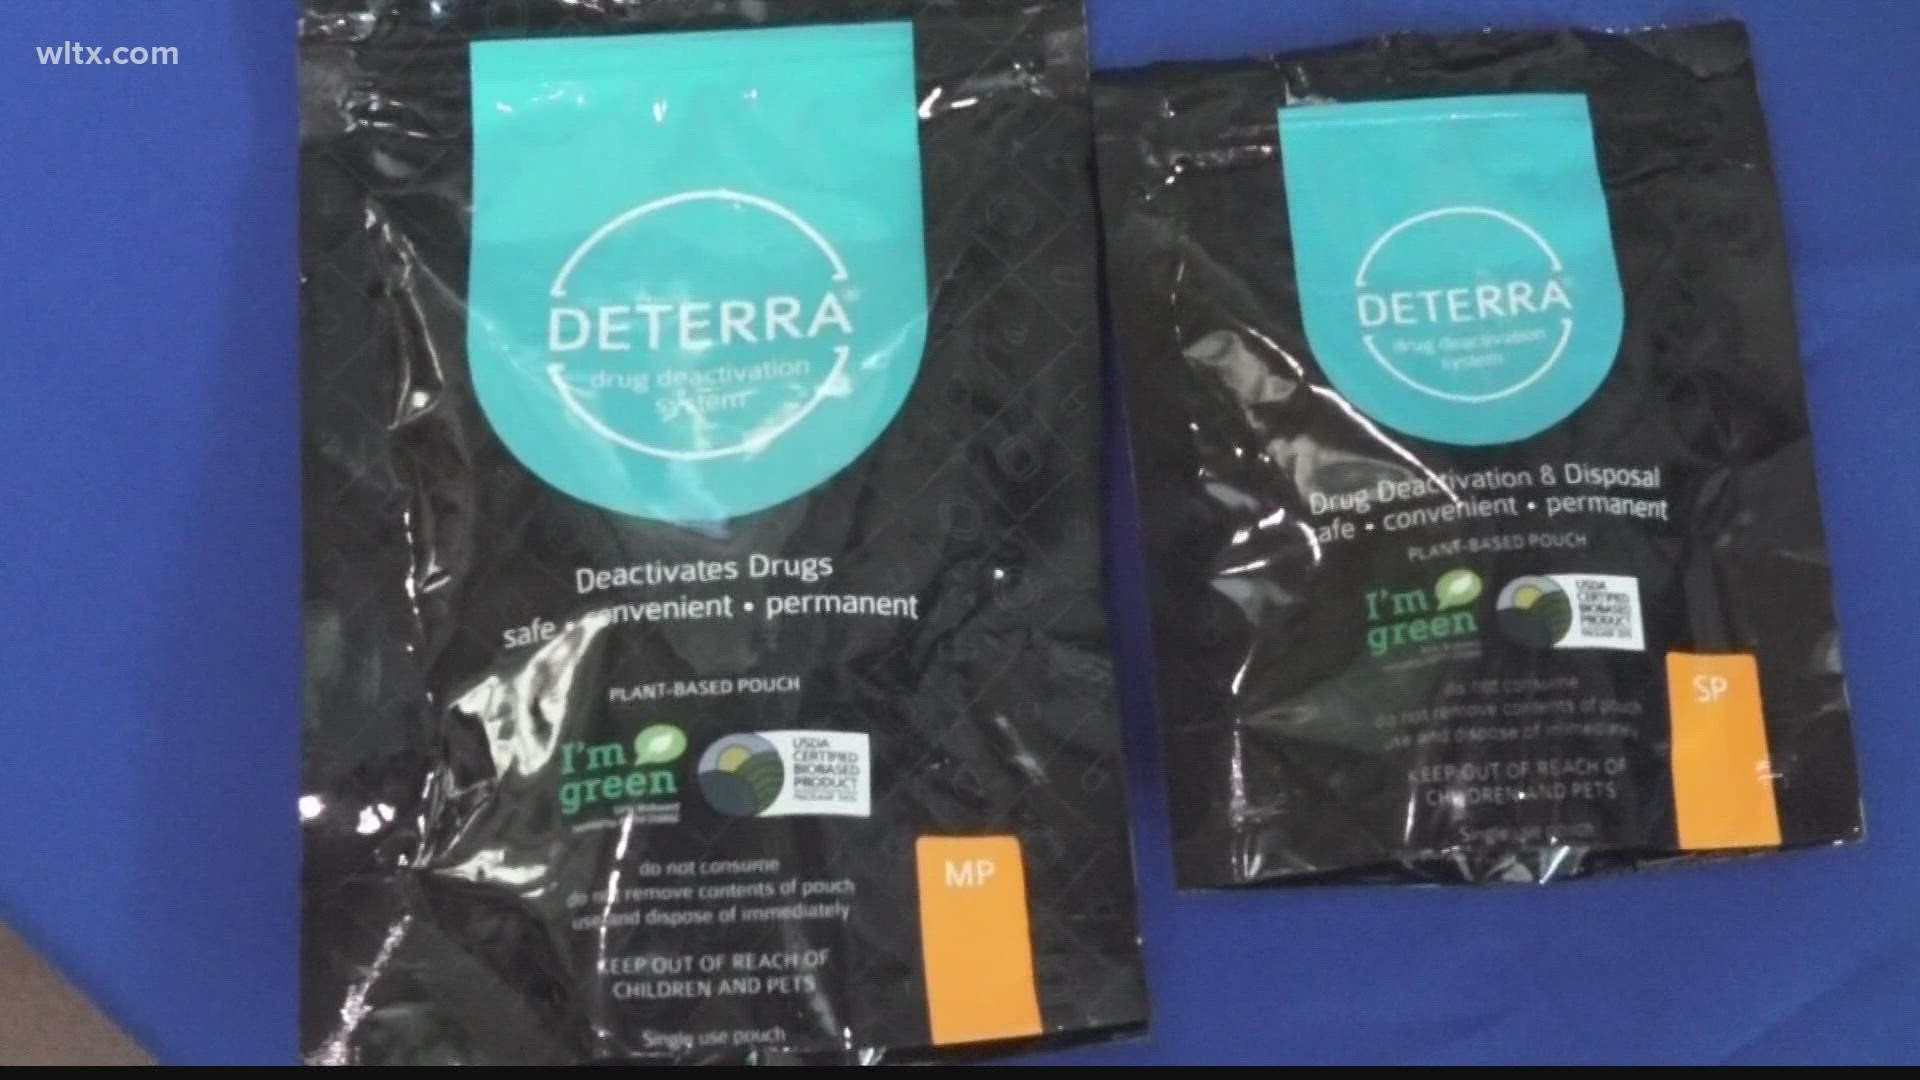 Orangeburg law enforcement says the pouches are easier for residents to get rid of unused or expired medicine.